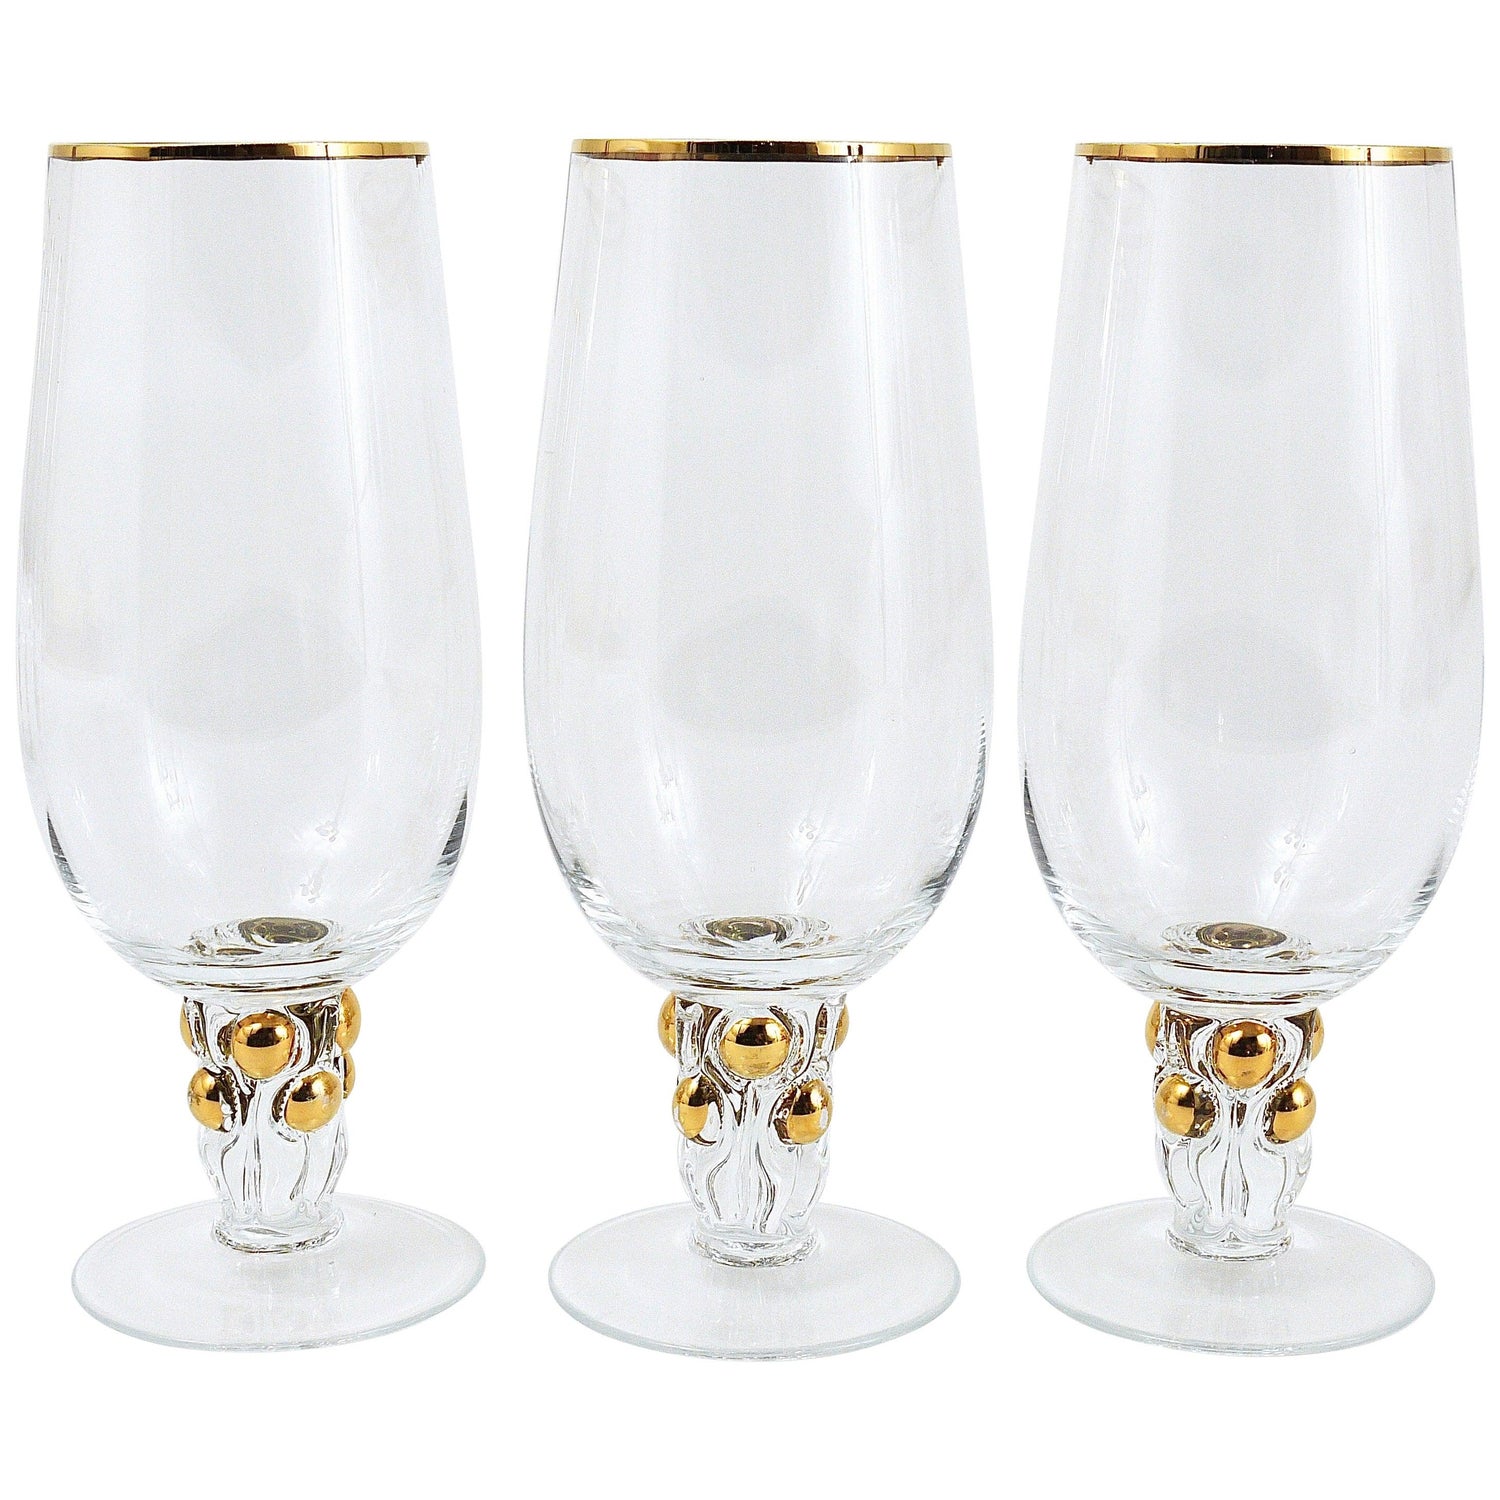 Pukeberg Glass Company - 3 For Sale at 1stDibs